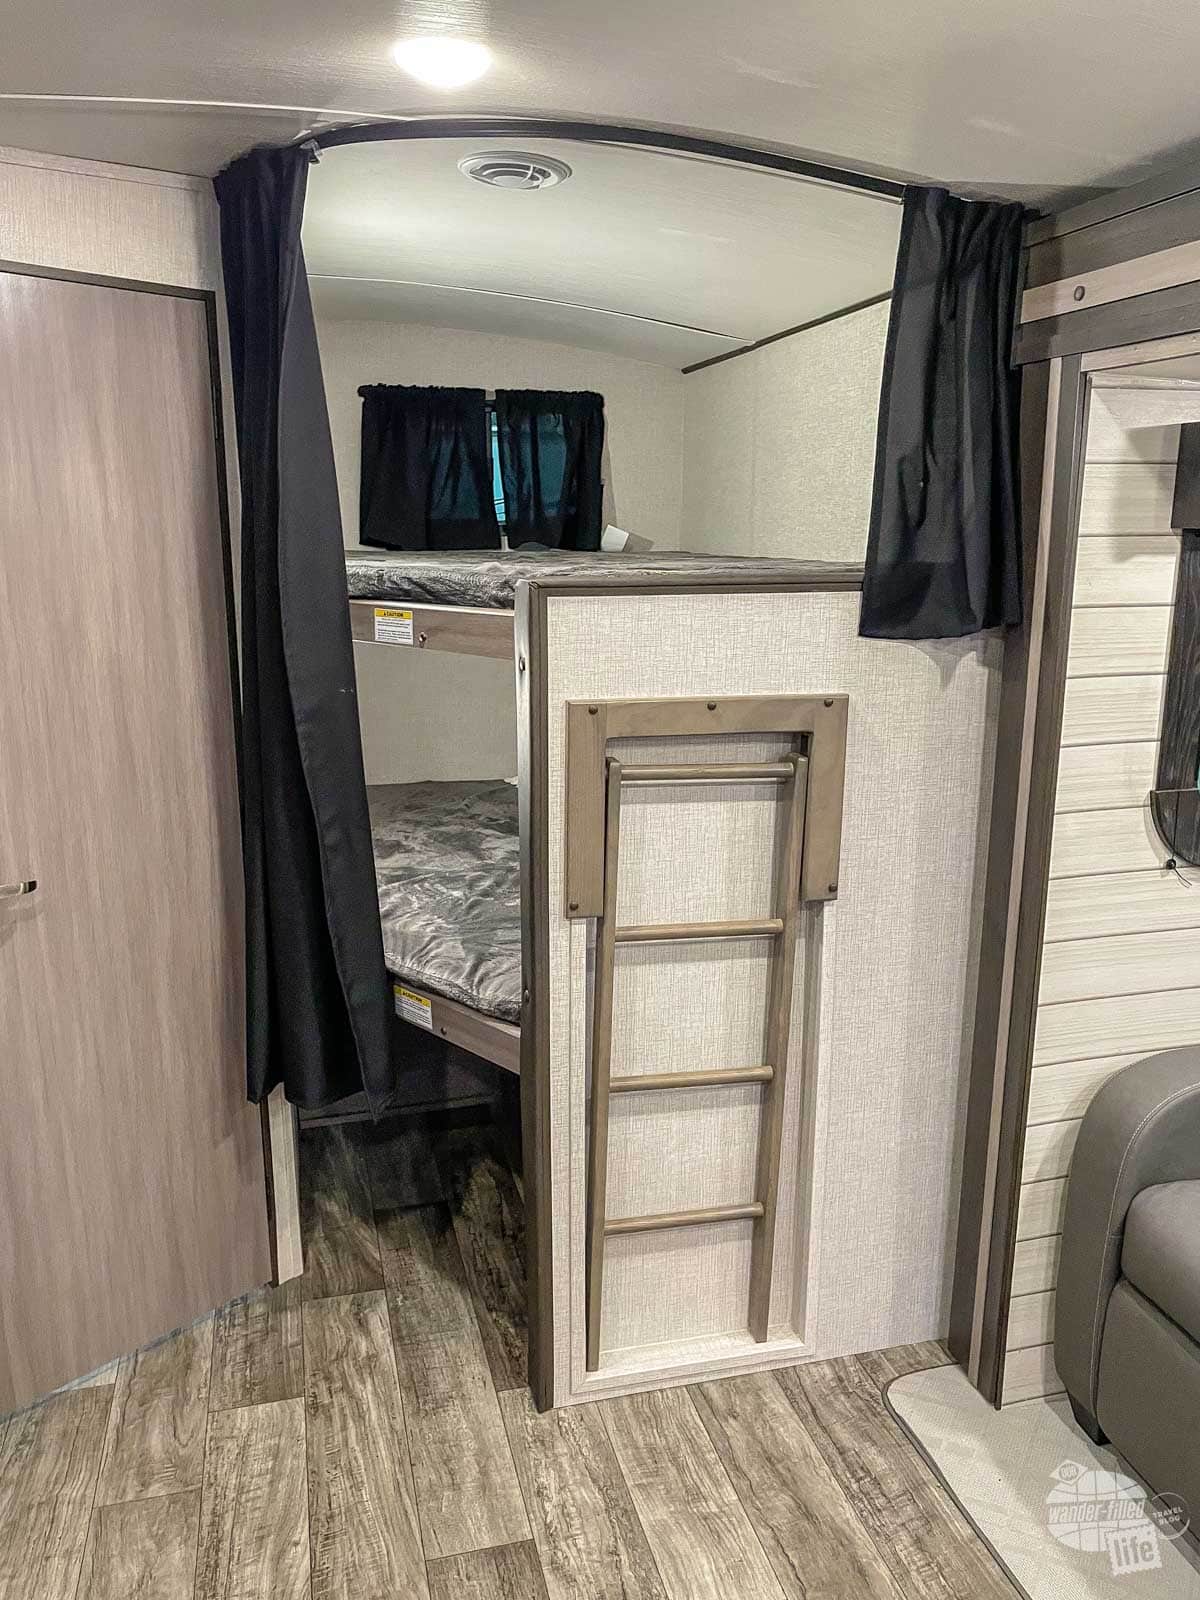 A bunk bed in an RV